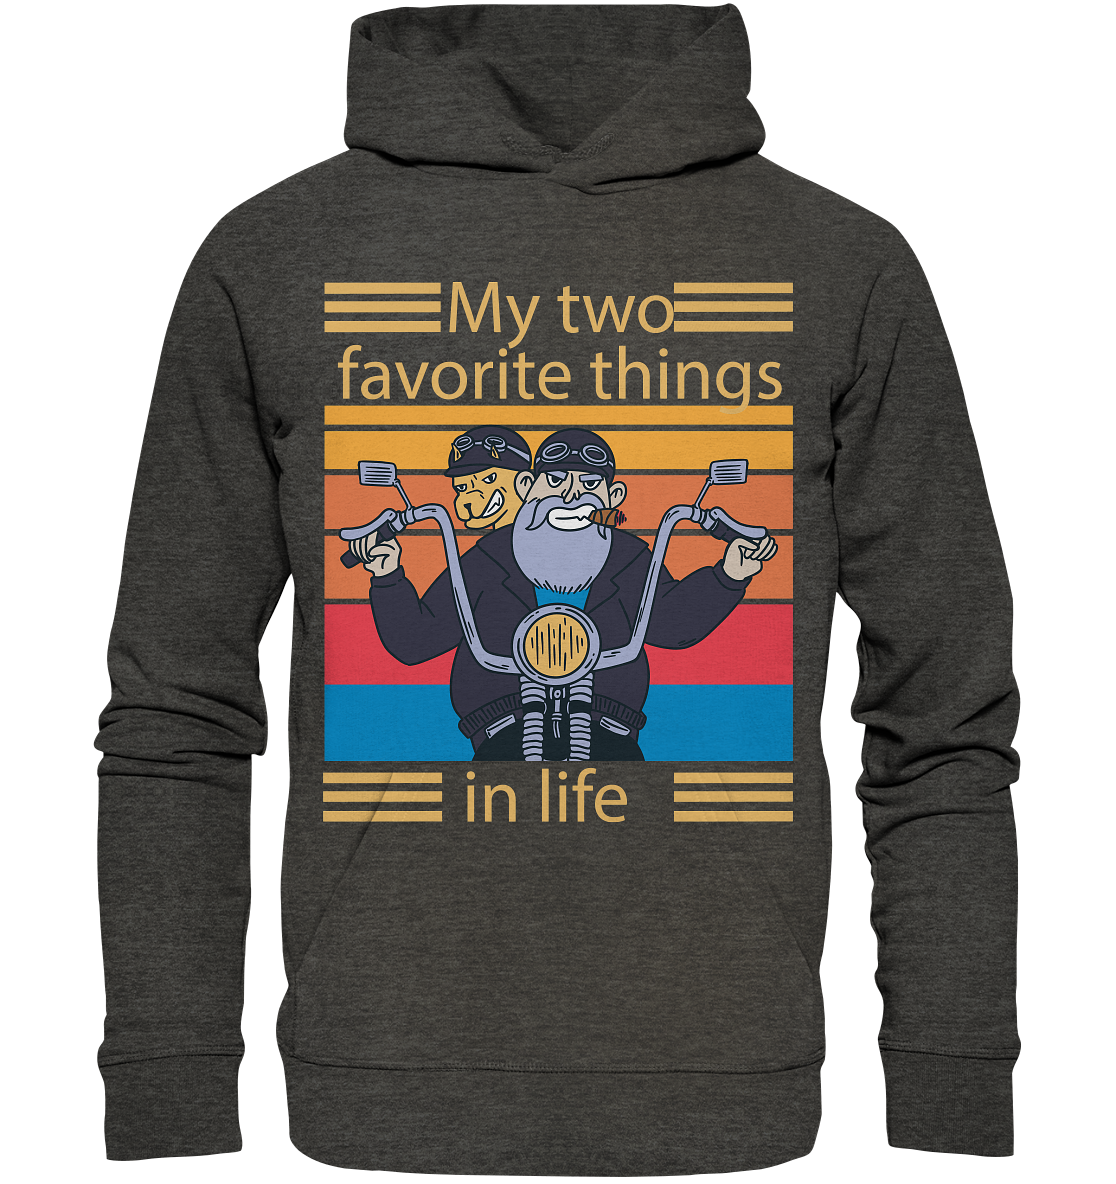 My two favorite things in life - Organic Hoodie - Online Kaufhaus München